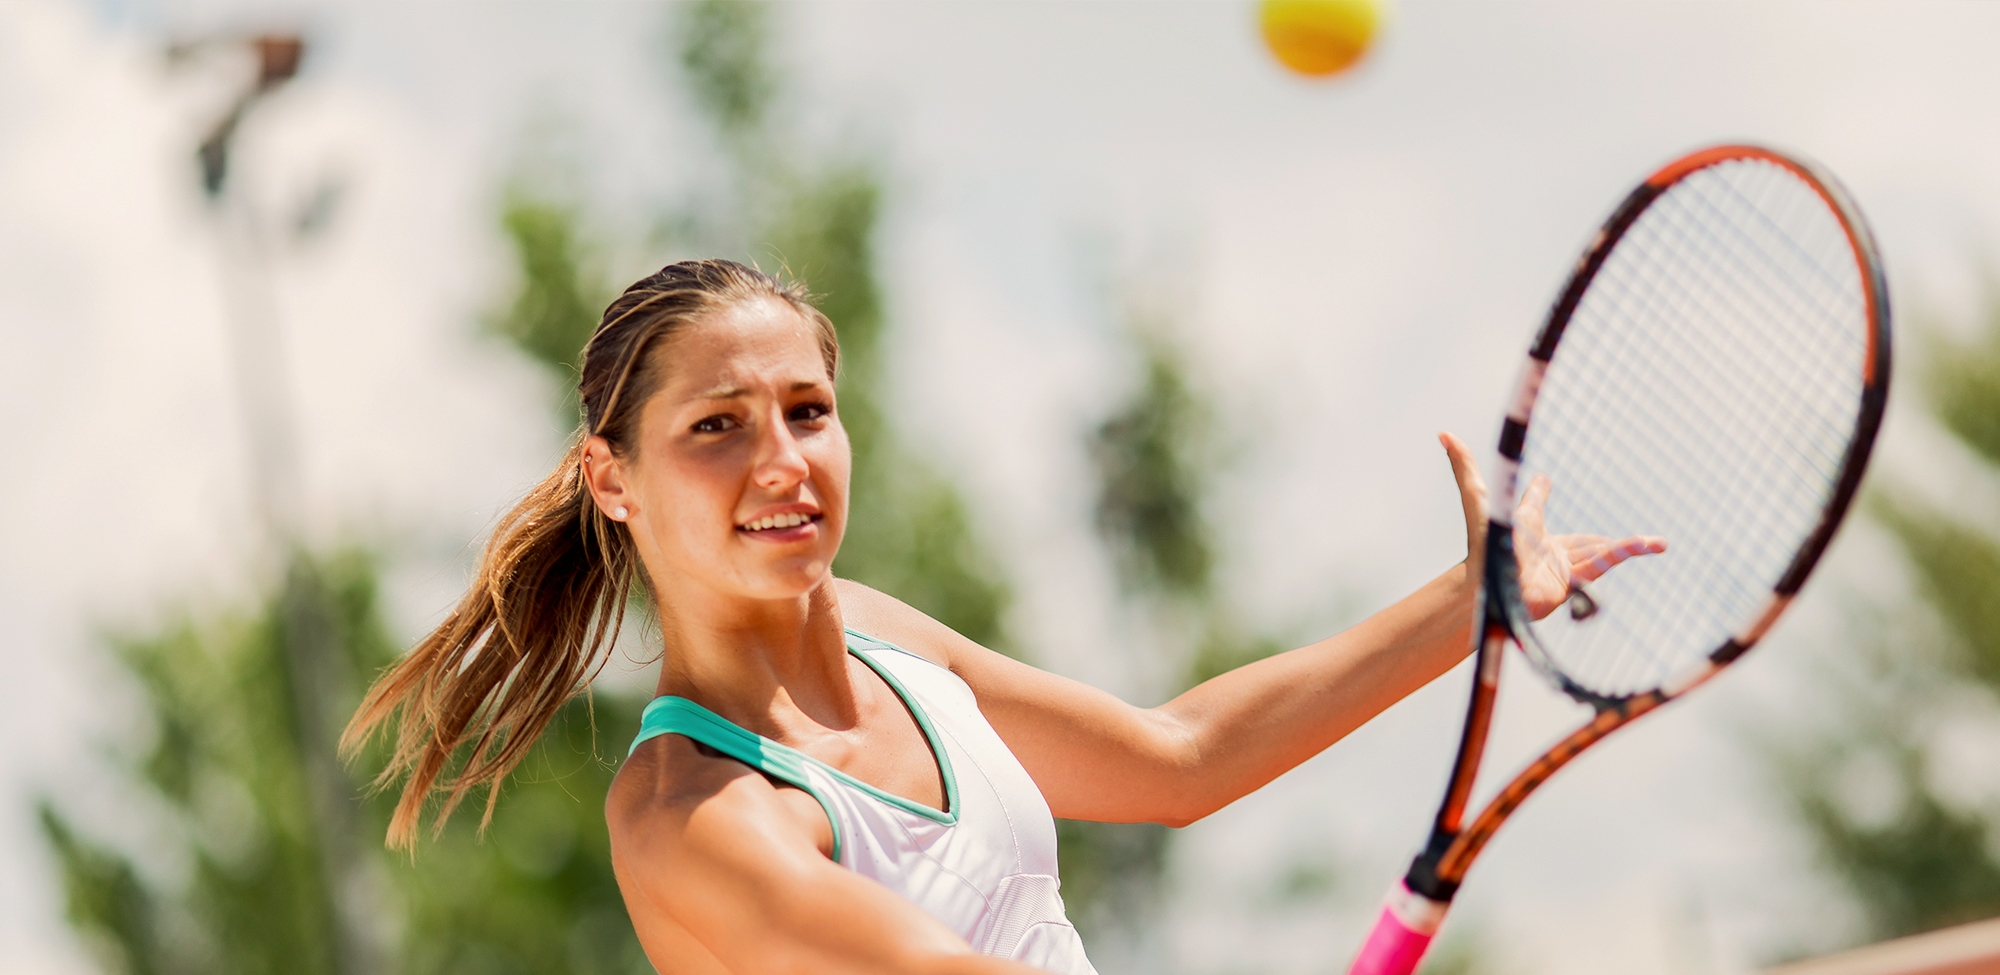 young woman playing tennis